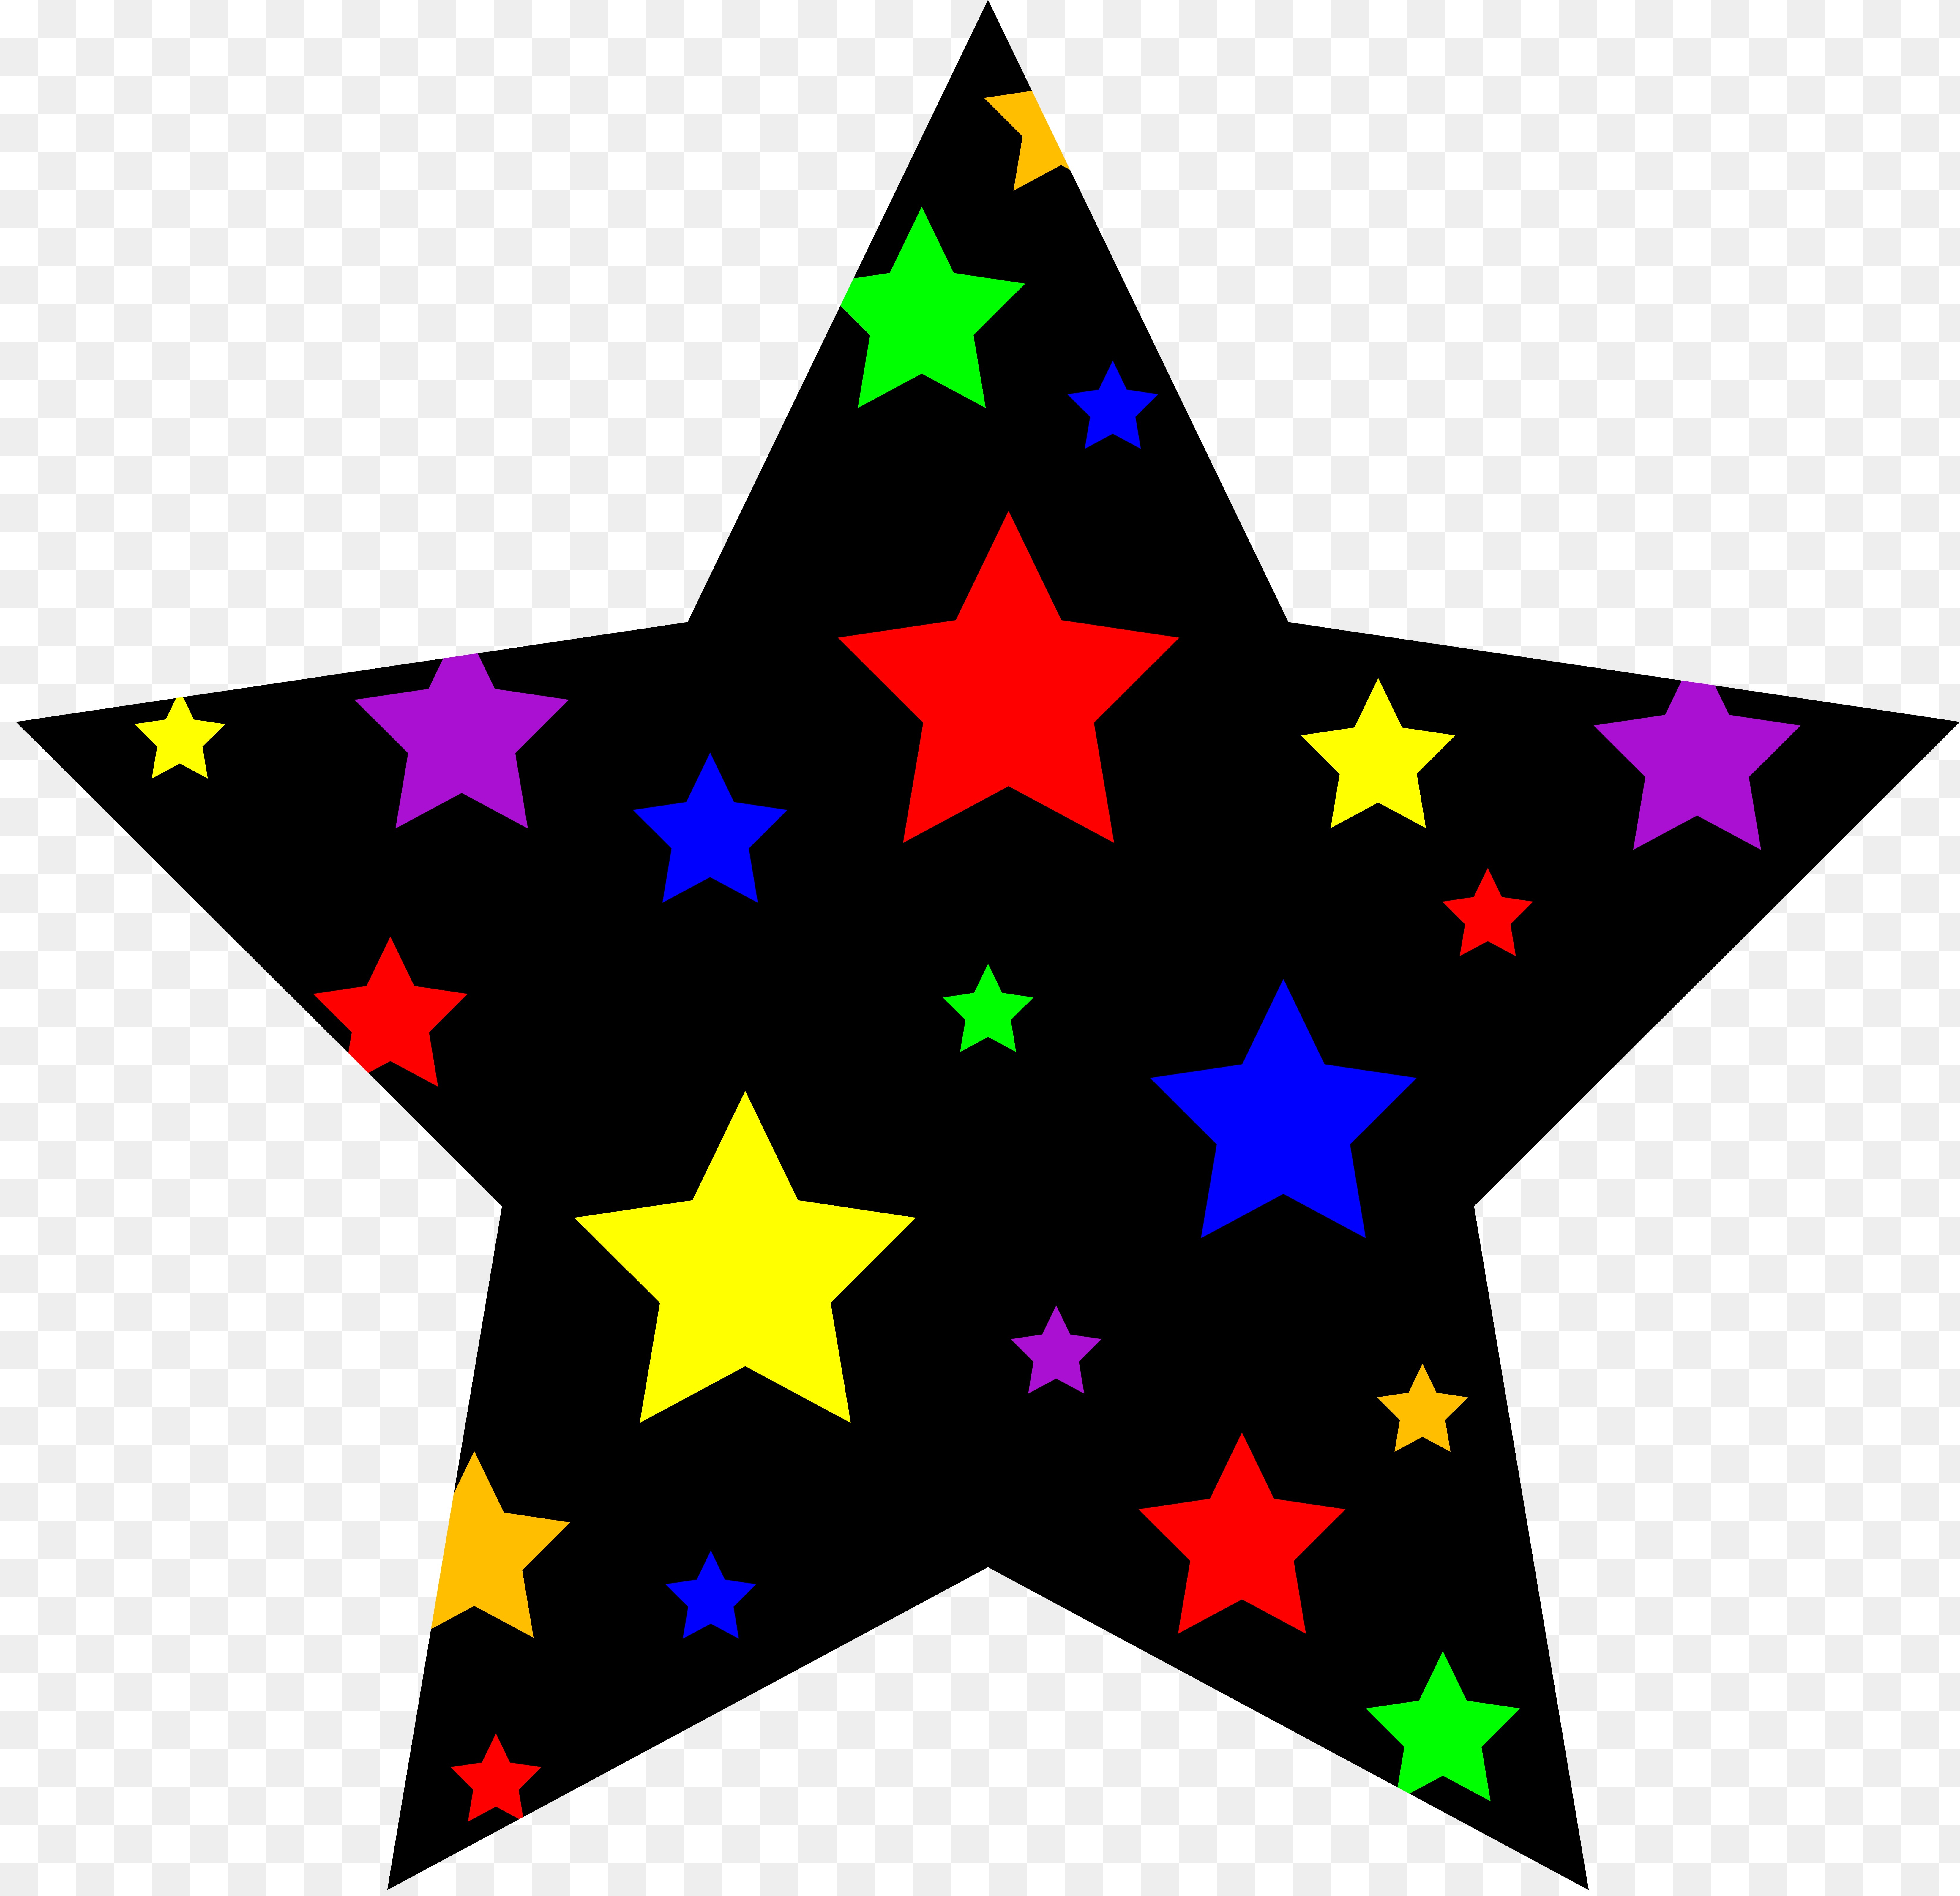 Red star clip art free clipart image